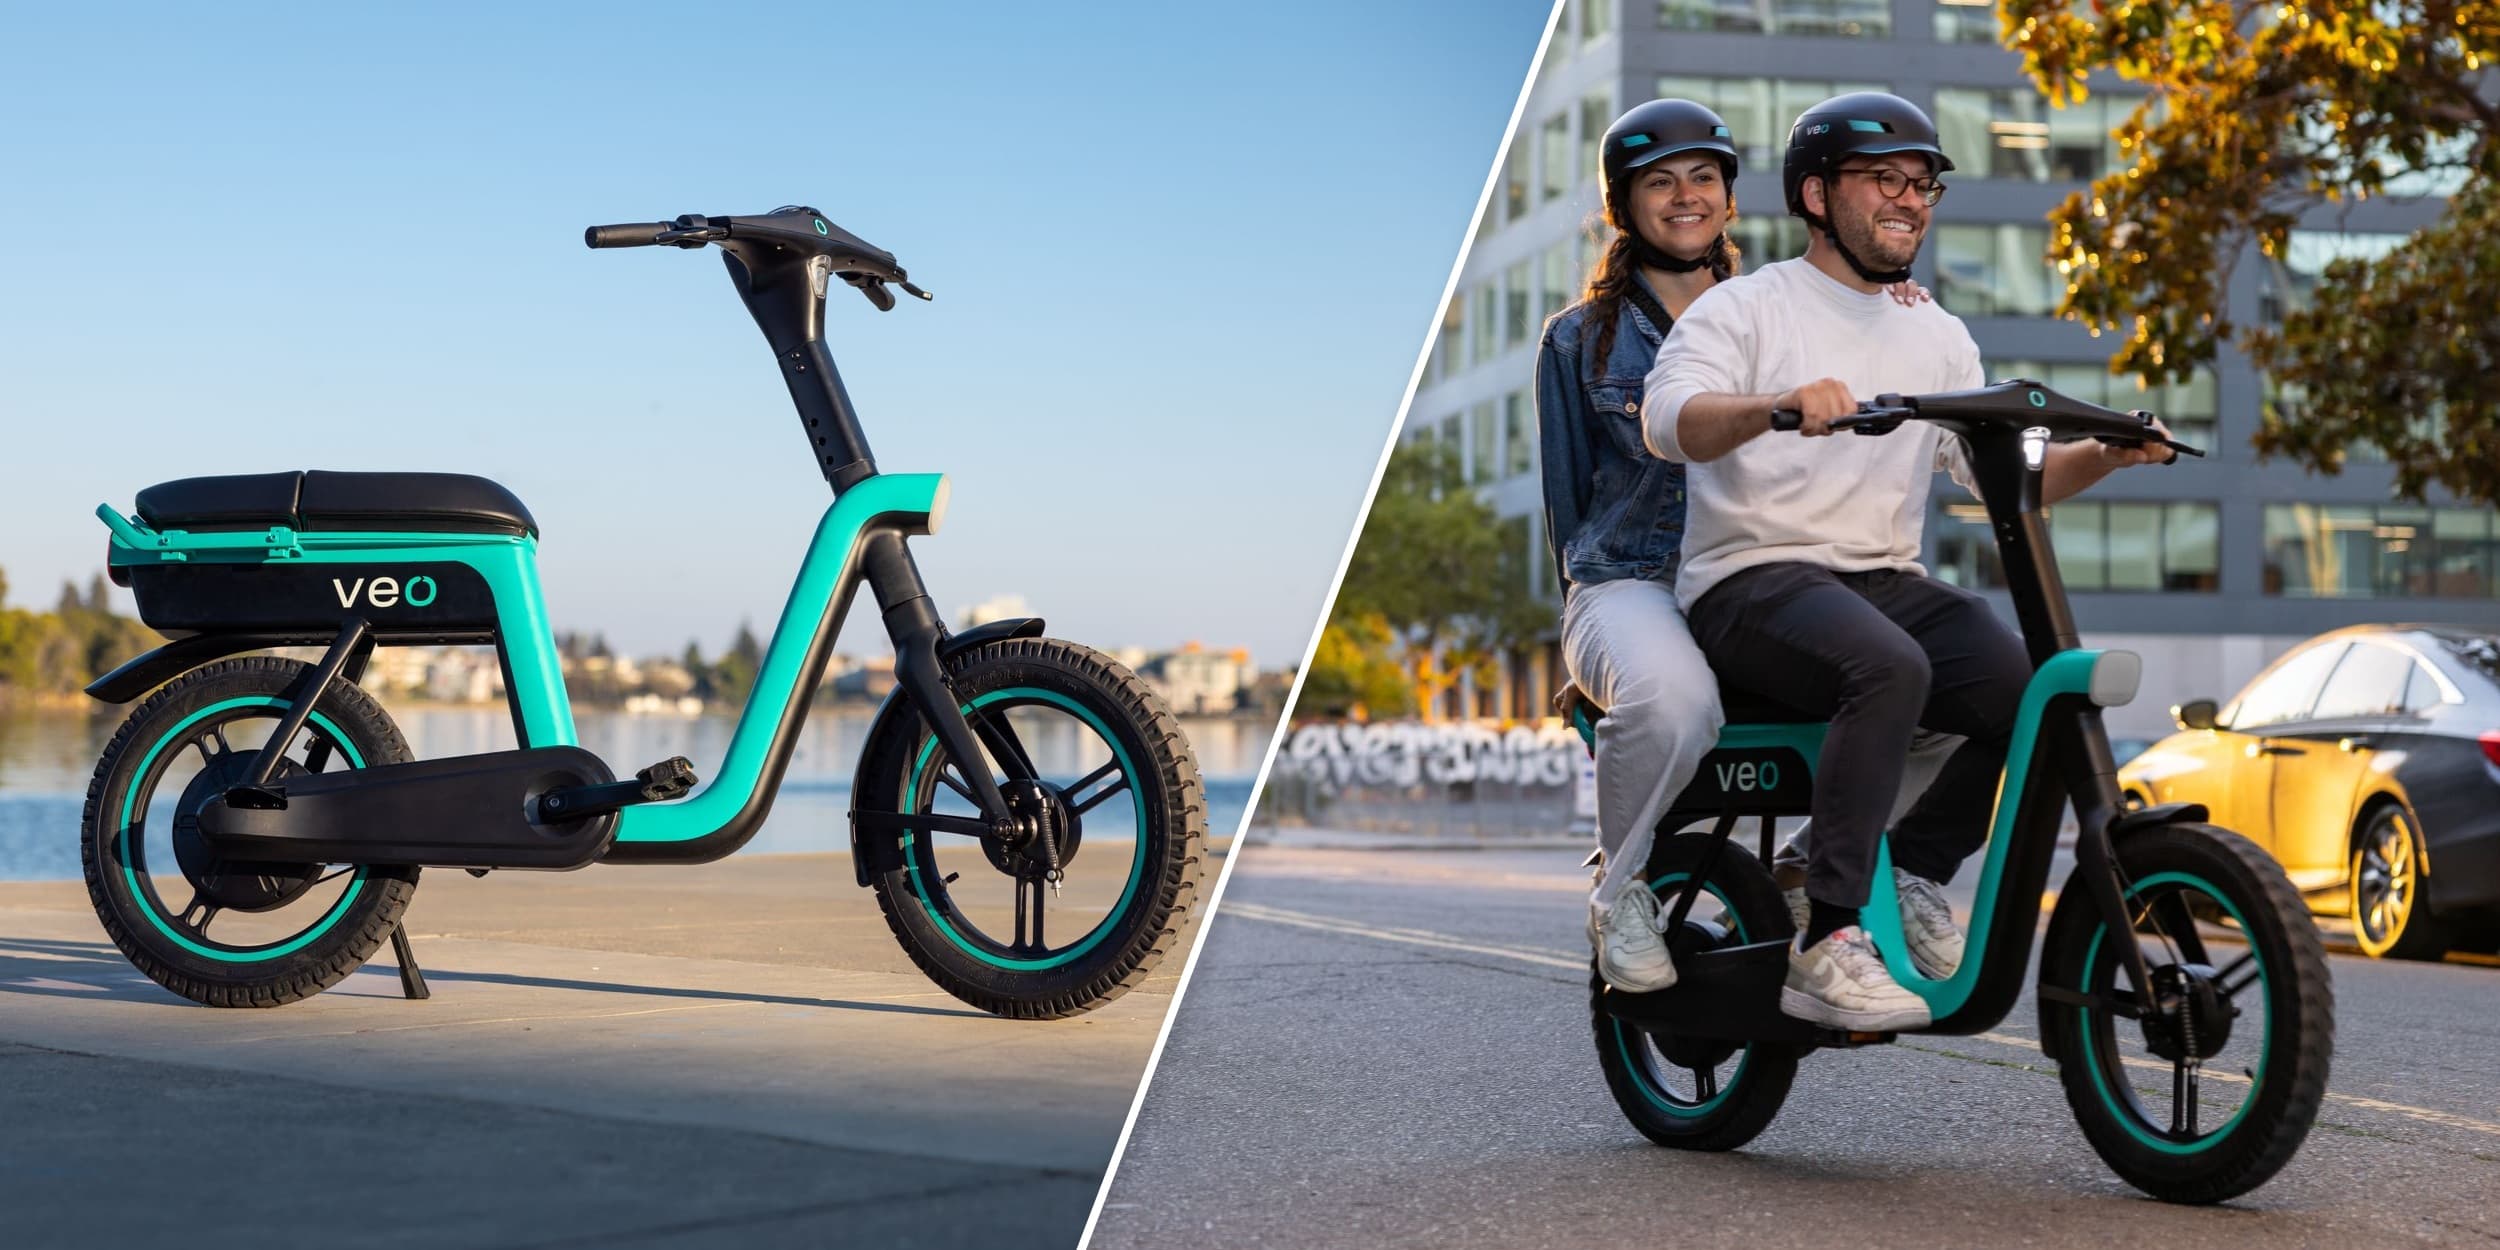 Veo Unveils New Shared Two-Seater Electric Scooter, Doubling Utility